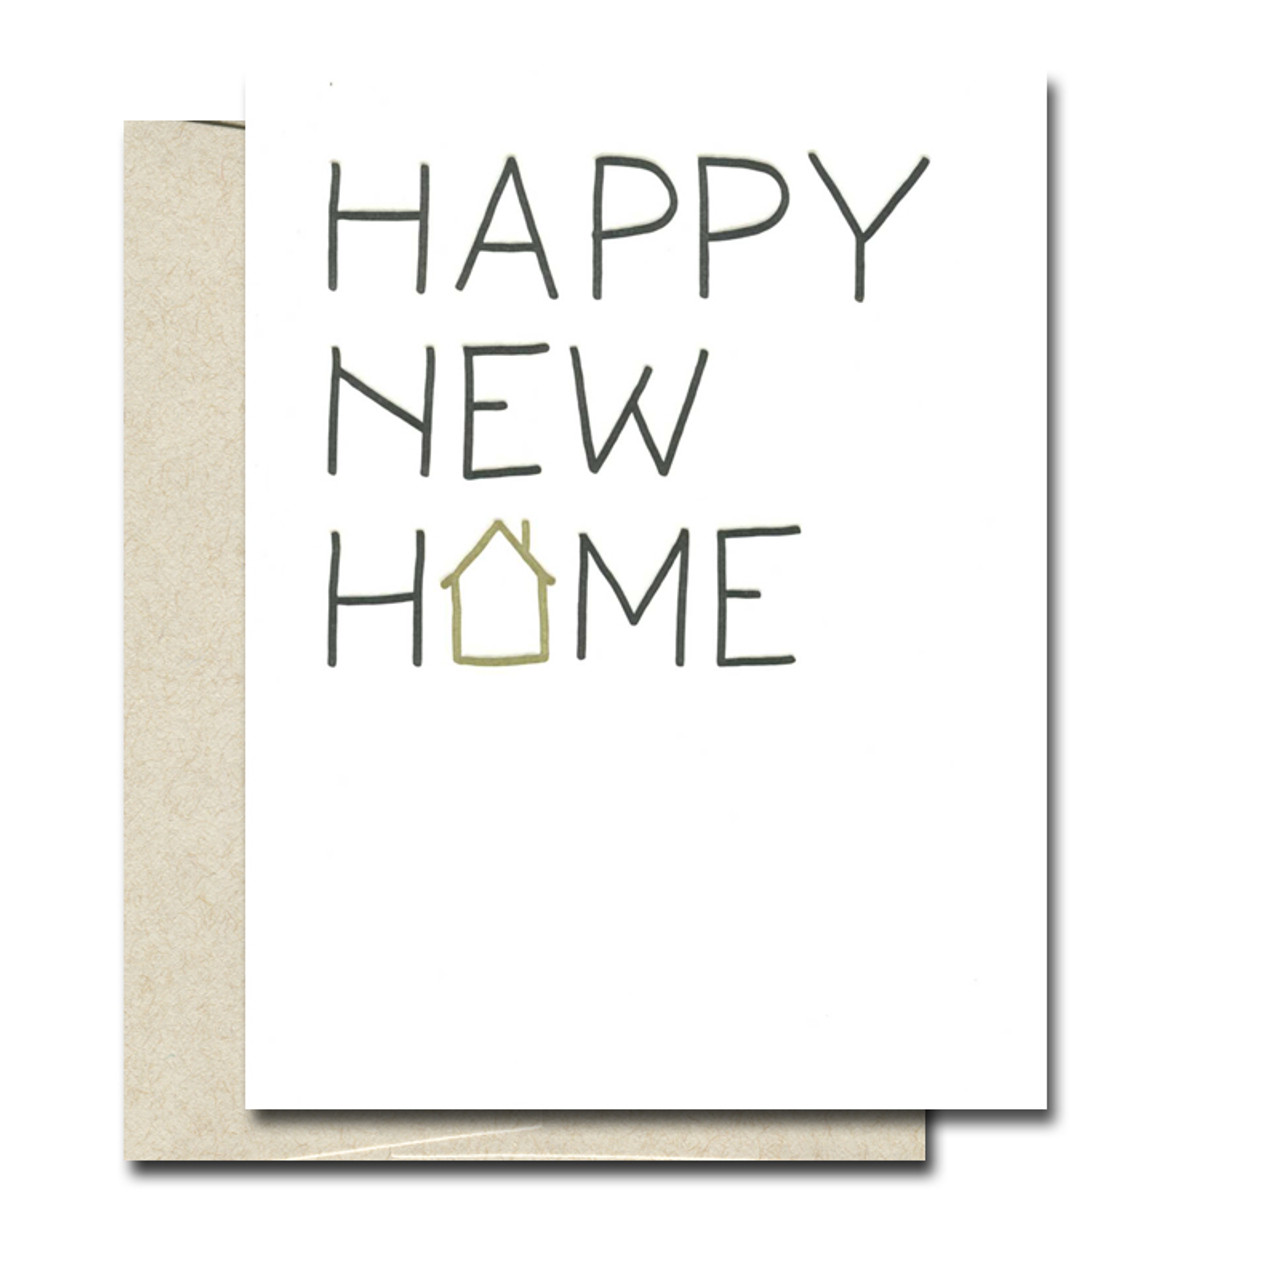 Happy New Home Letterpress card from Ink Meets Paper